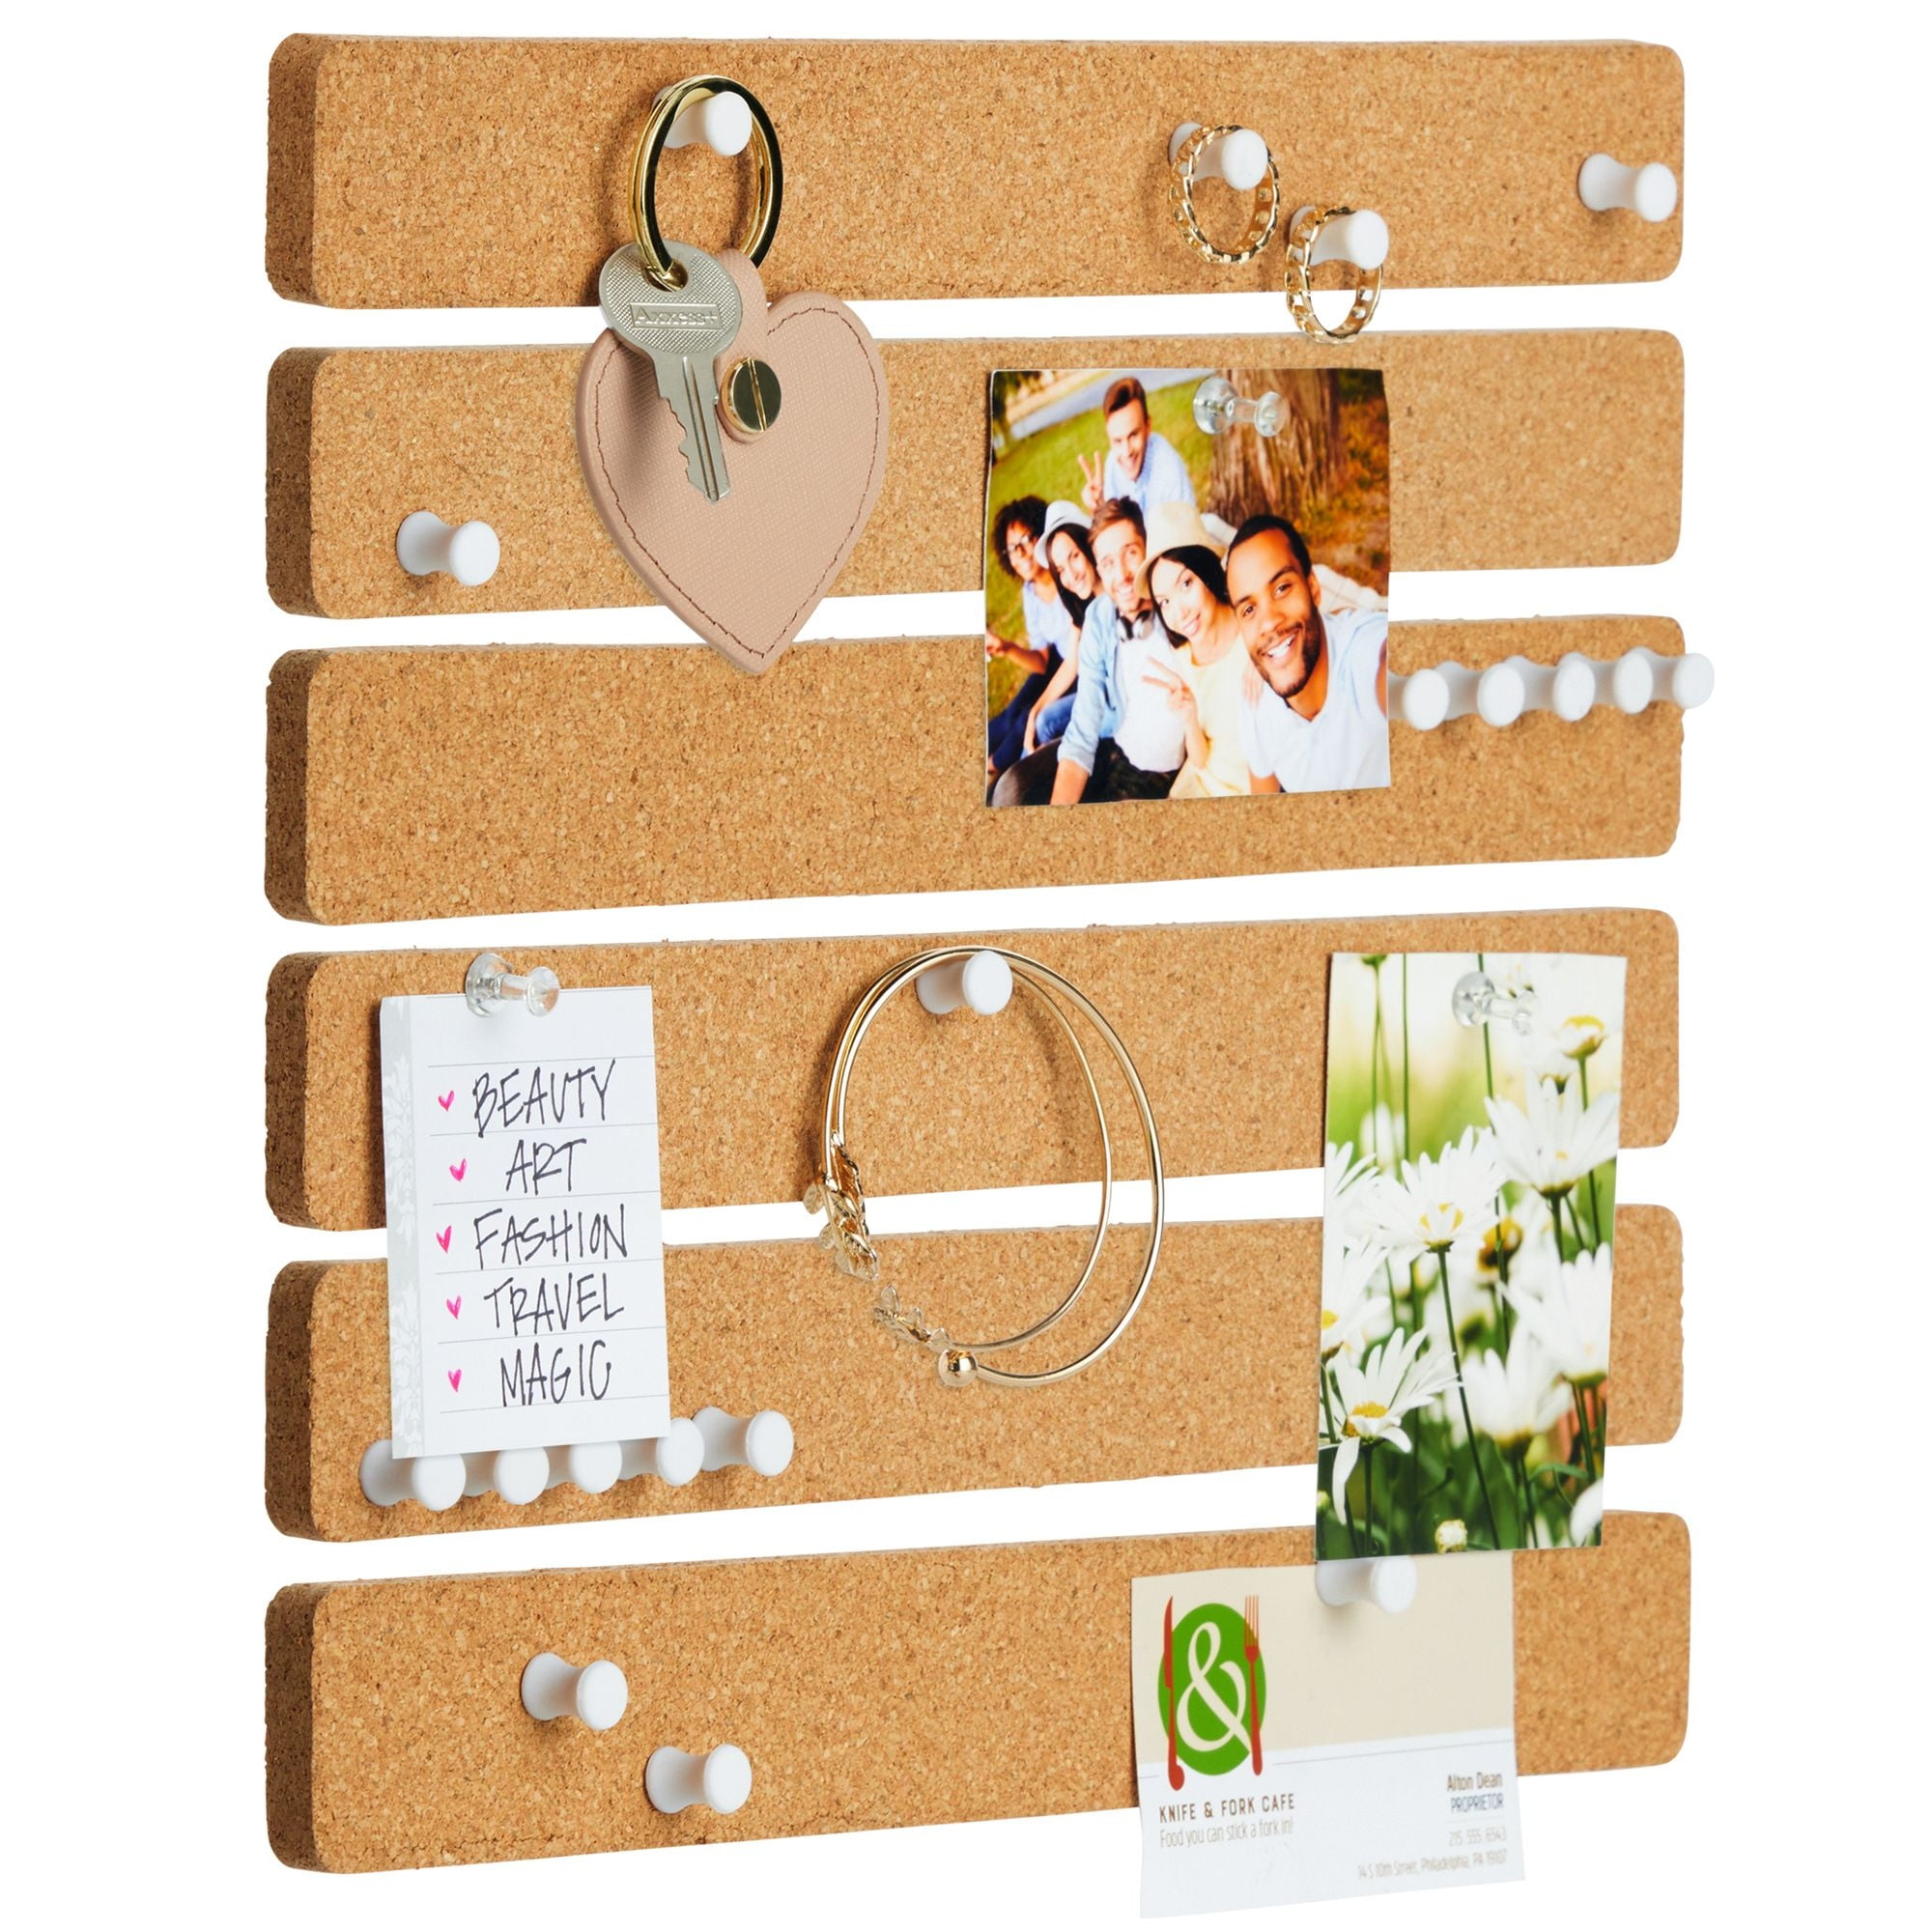 6 Pack Adhesive Cork Board Bulletin Bar Strips for Walls, 12x1.5 Pin  Boards with Tape for Office Supplies, Reminders, Notes 